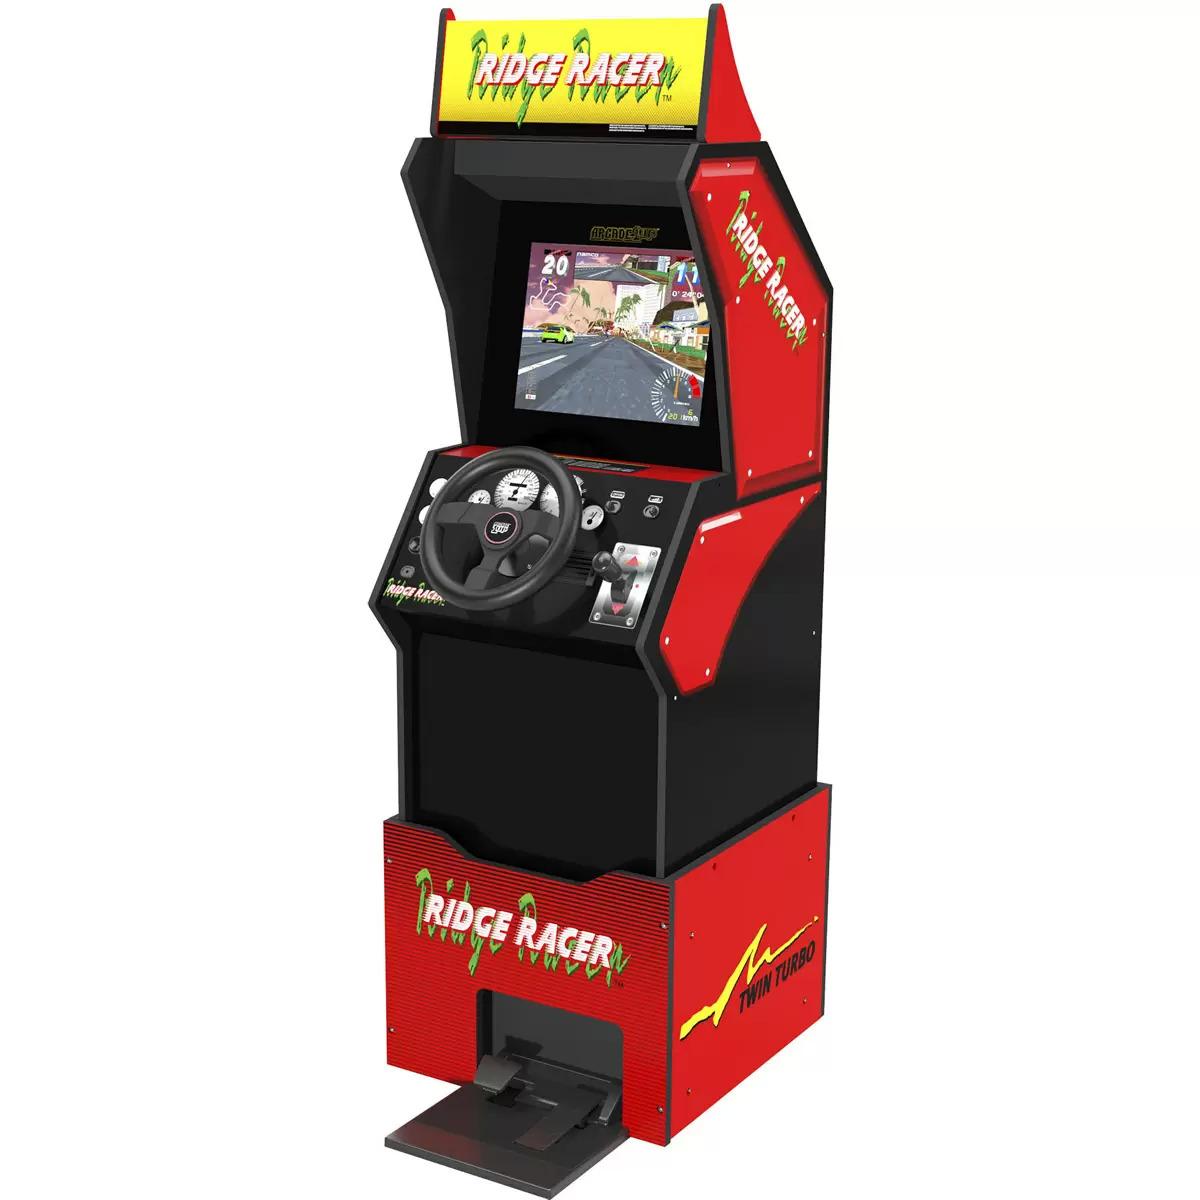 Arcade1Up Ridge Racer Arcade Cabinet for $399.99 Shipped